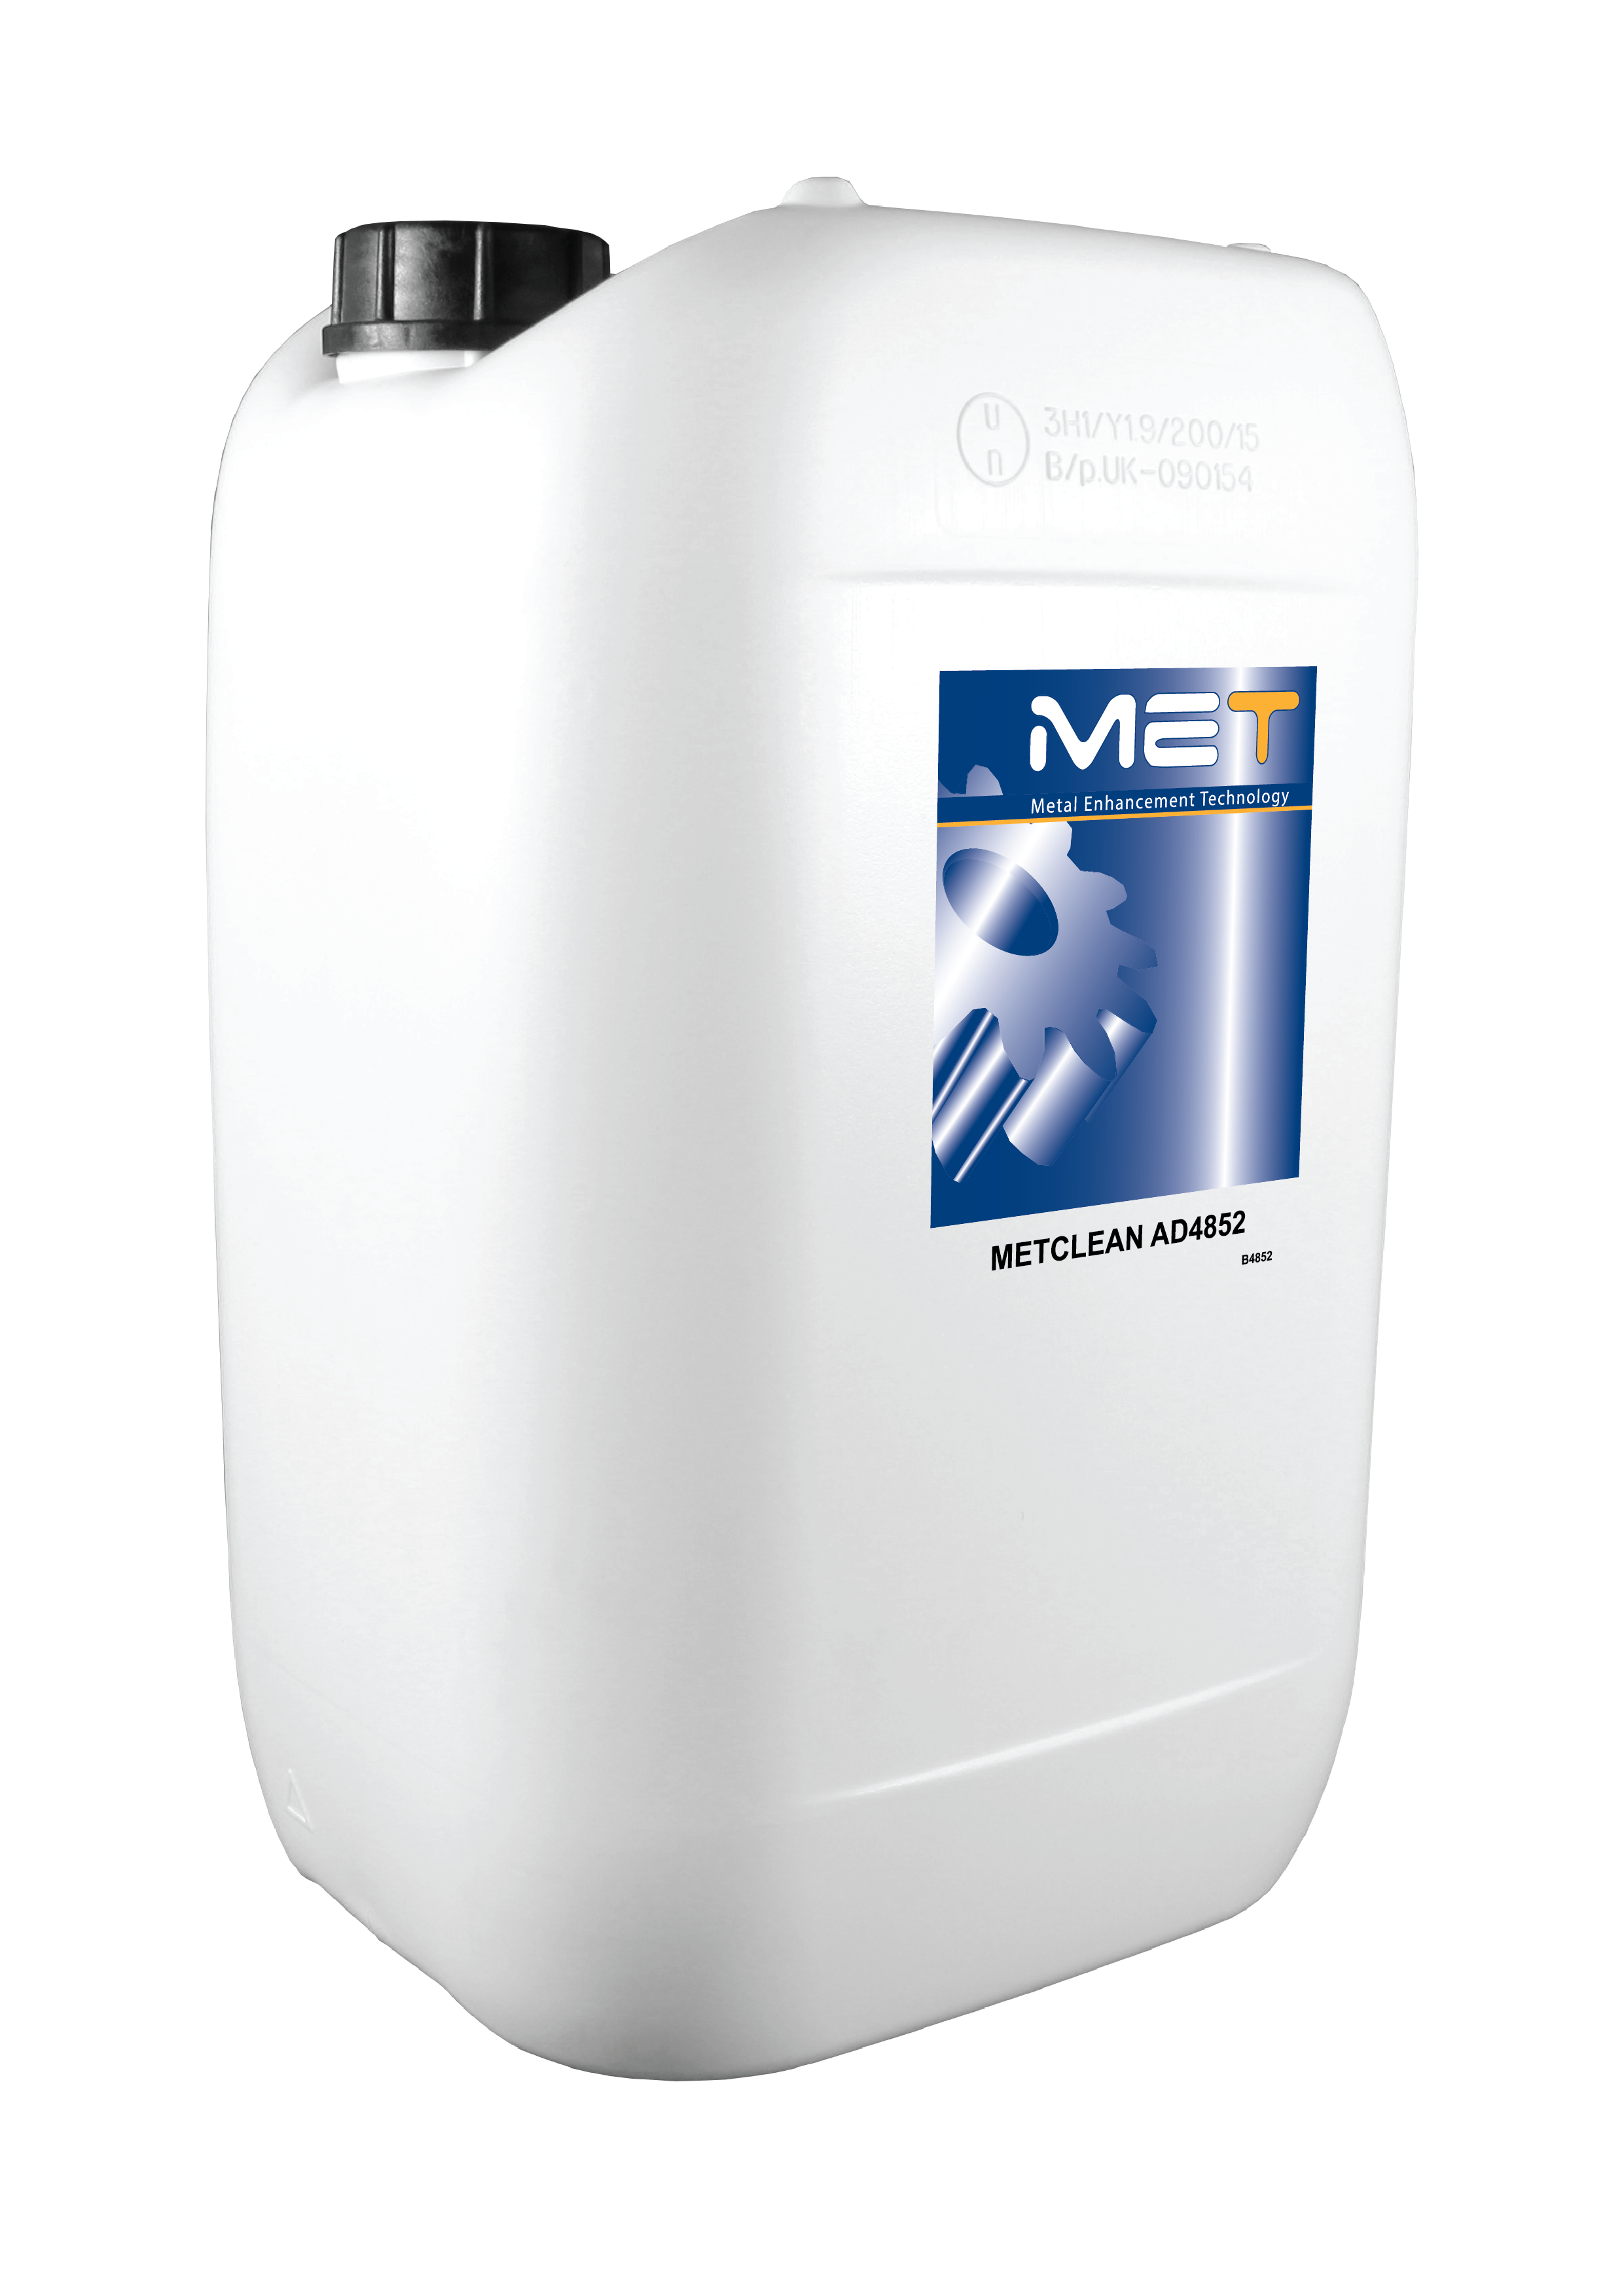 Metclean AD4852